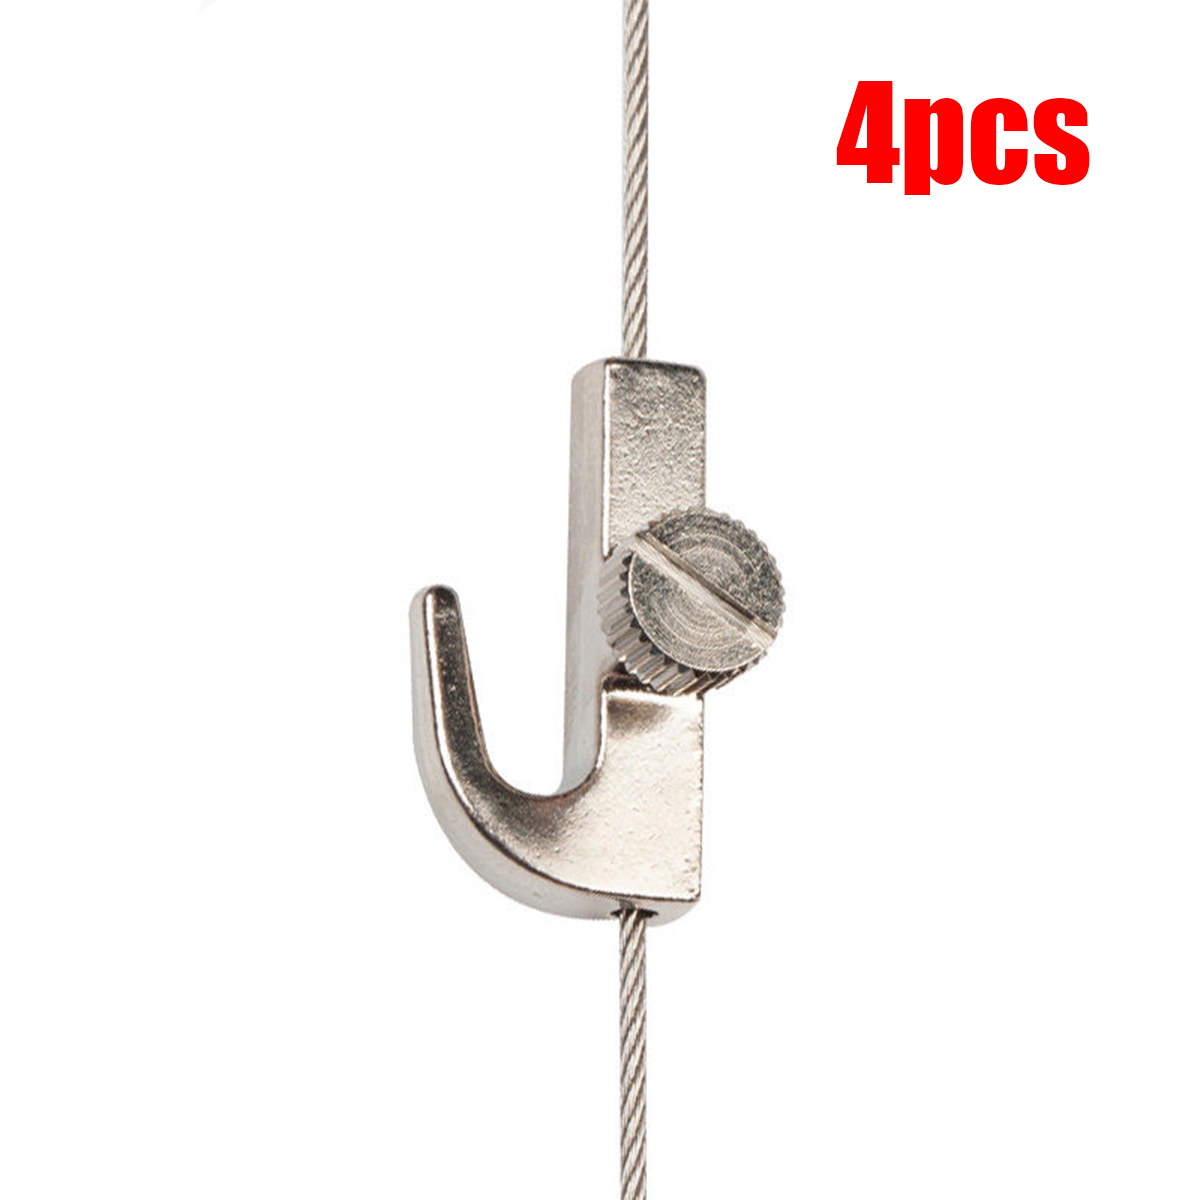 4pcs-Picture-Hanging-System-Hangers-Adjustable-Hooks-for-15-2mm-CABLE-1267430